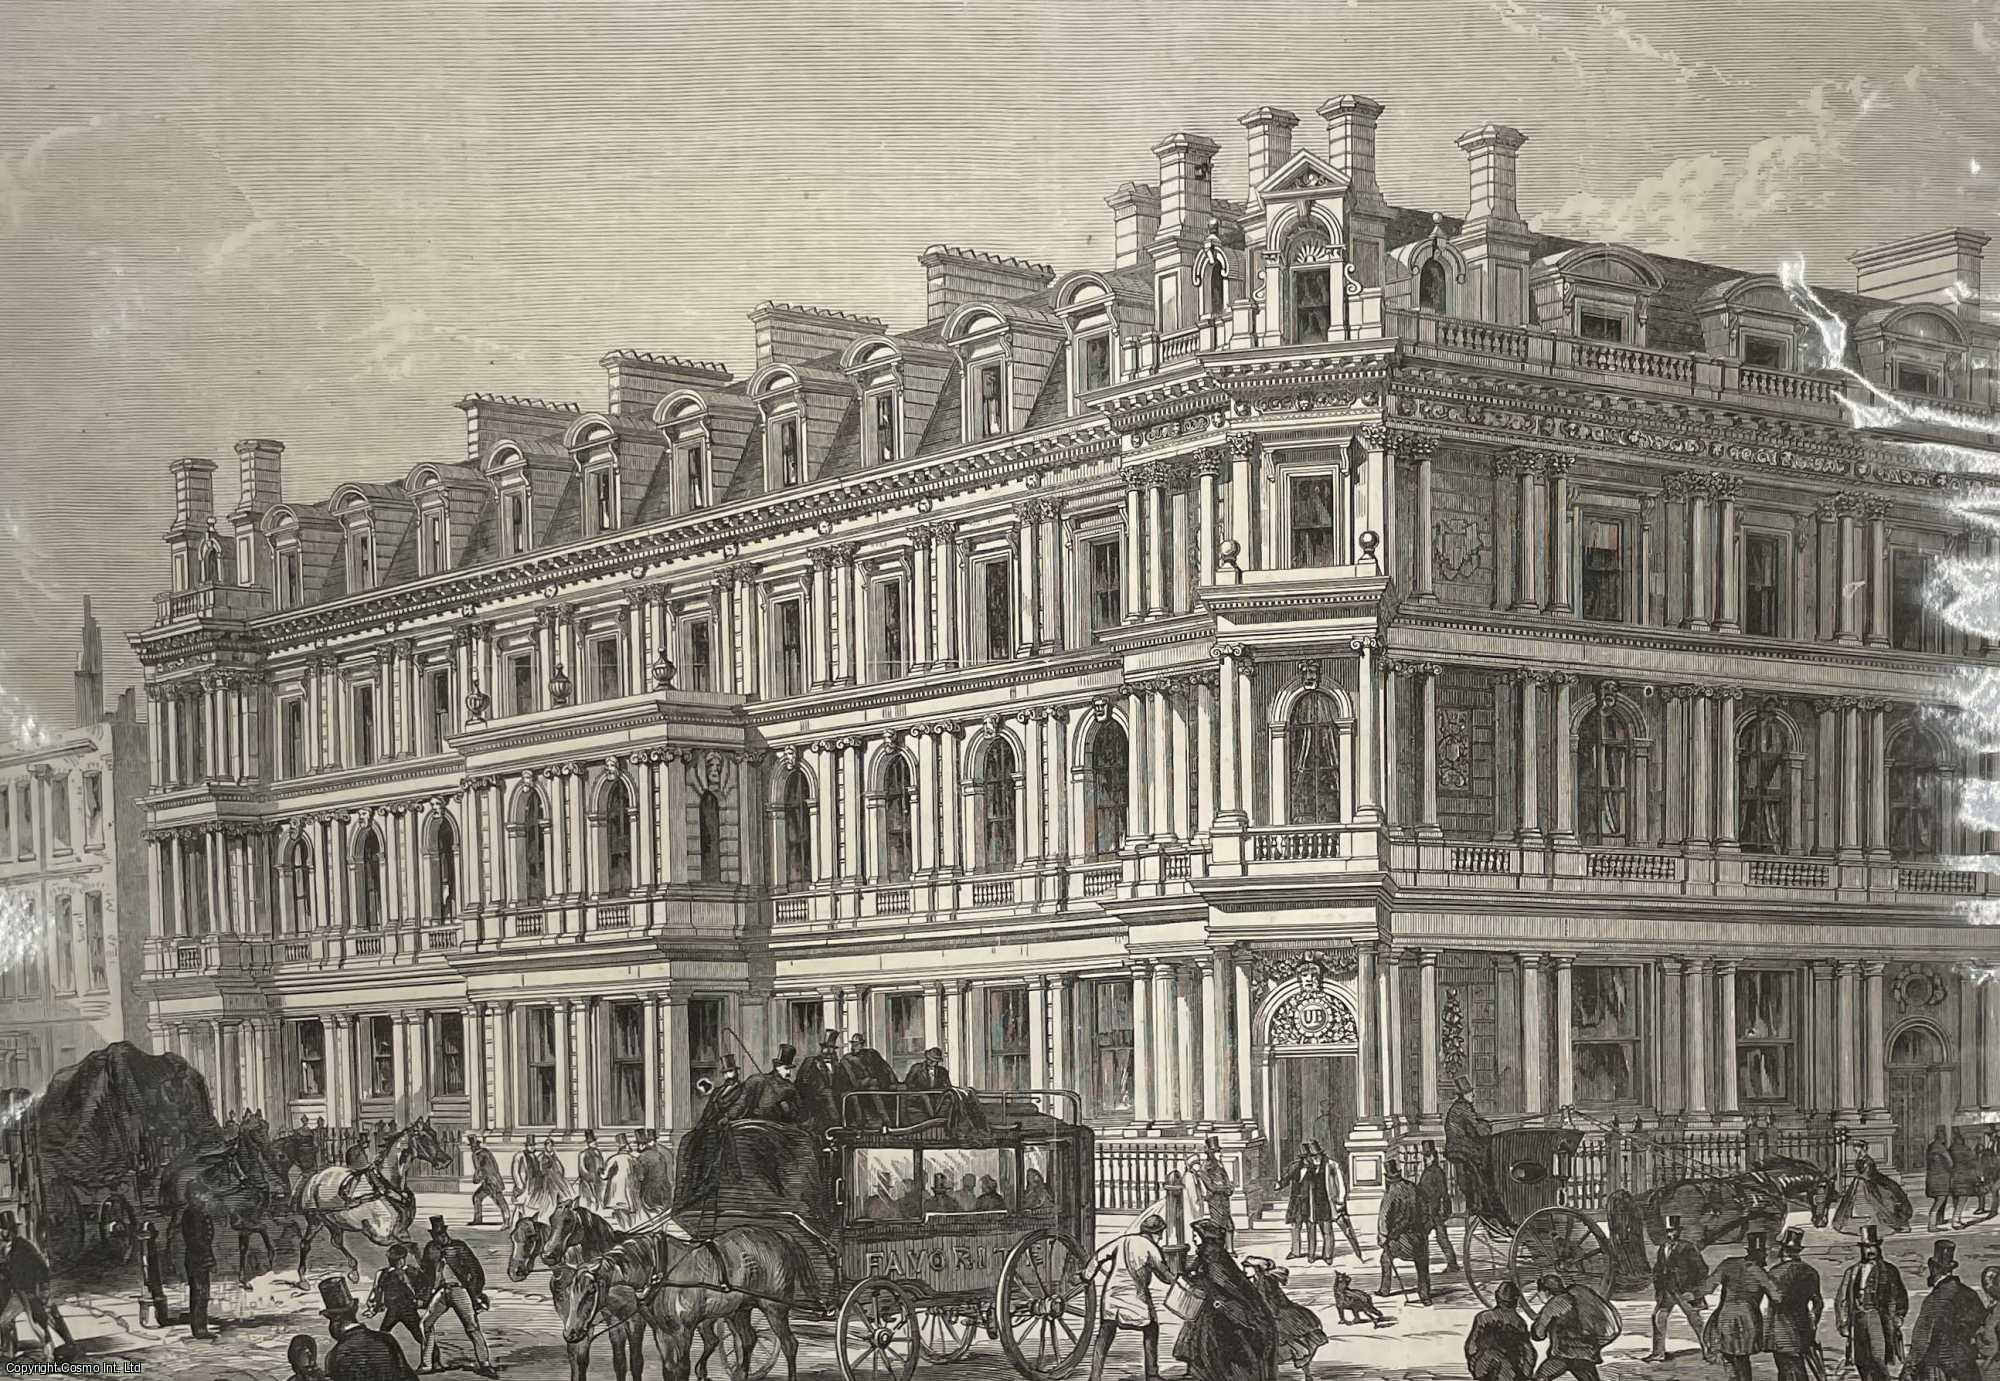 BANKING - The Union Bank of London, Chancery Lane. An original print from the Illustrated London News, 1866.